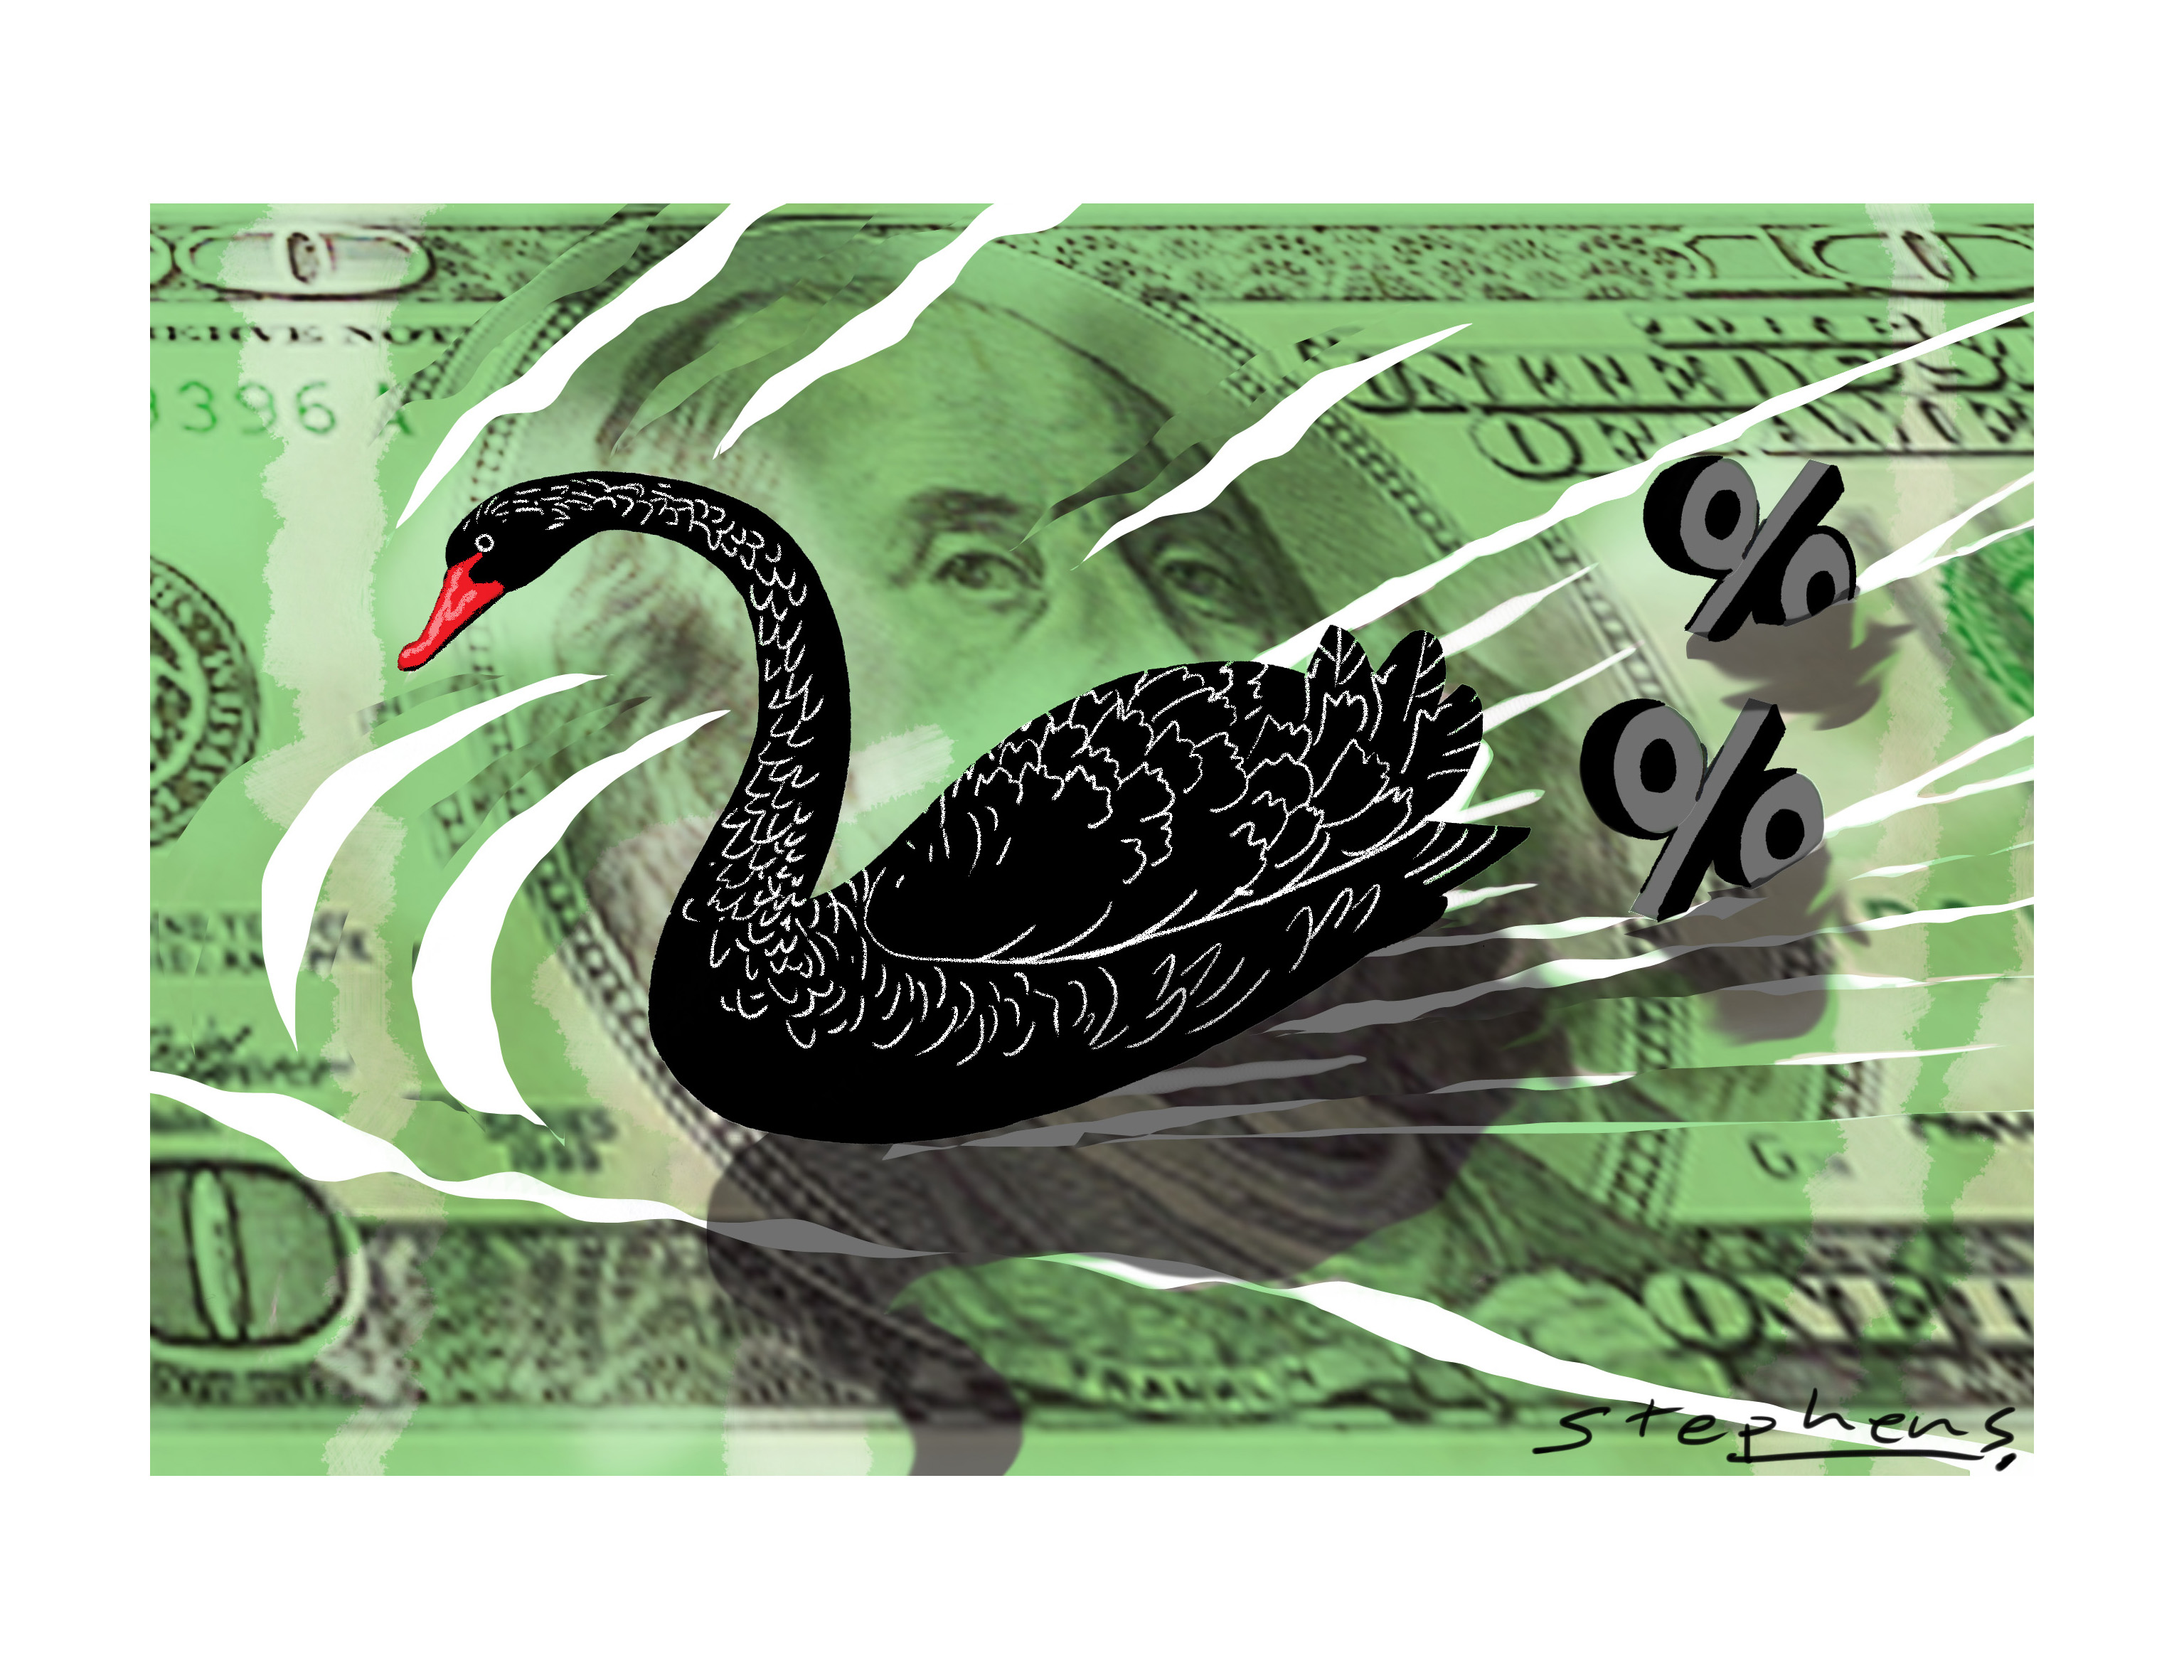 A loss of the credibility for the Fed, as a result of a policy flip-flop, would be the ultimate black swan event for markets.